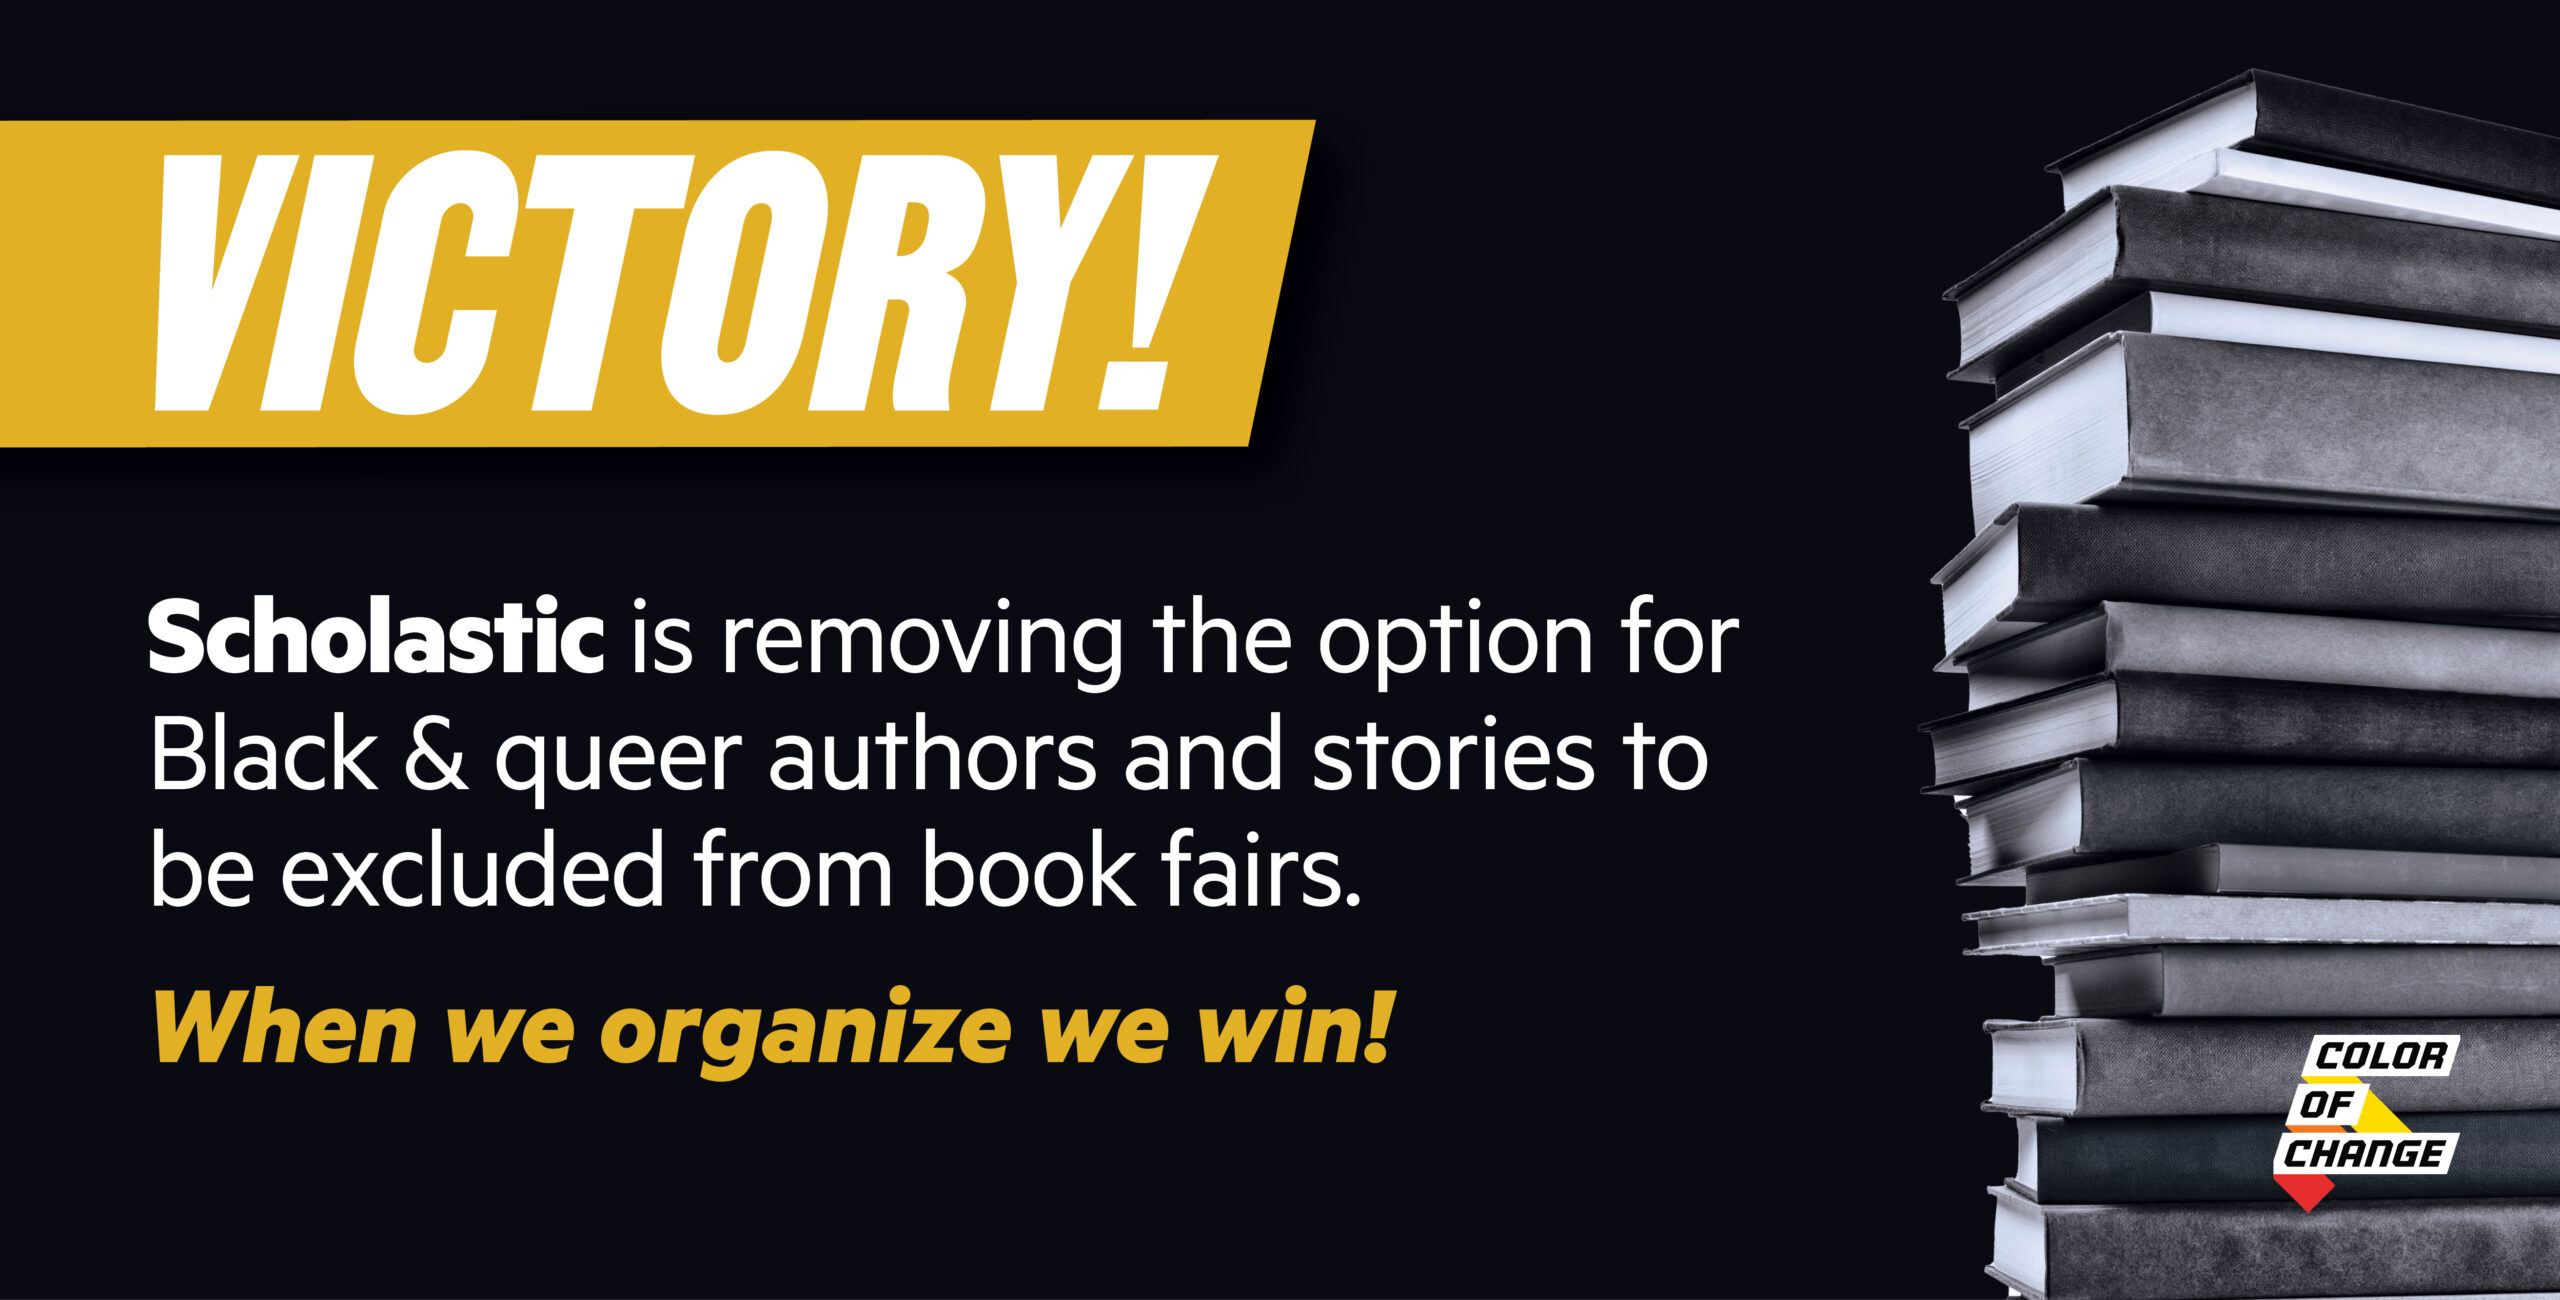 Scholastic reverses decision separating banned books at book fairs